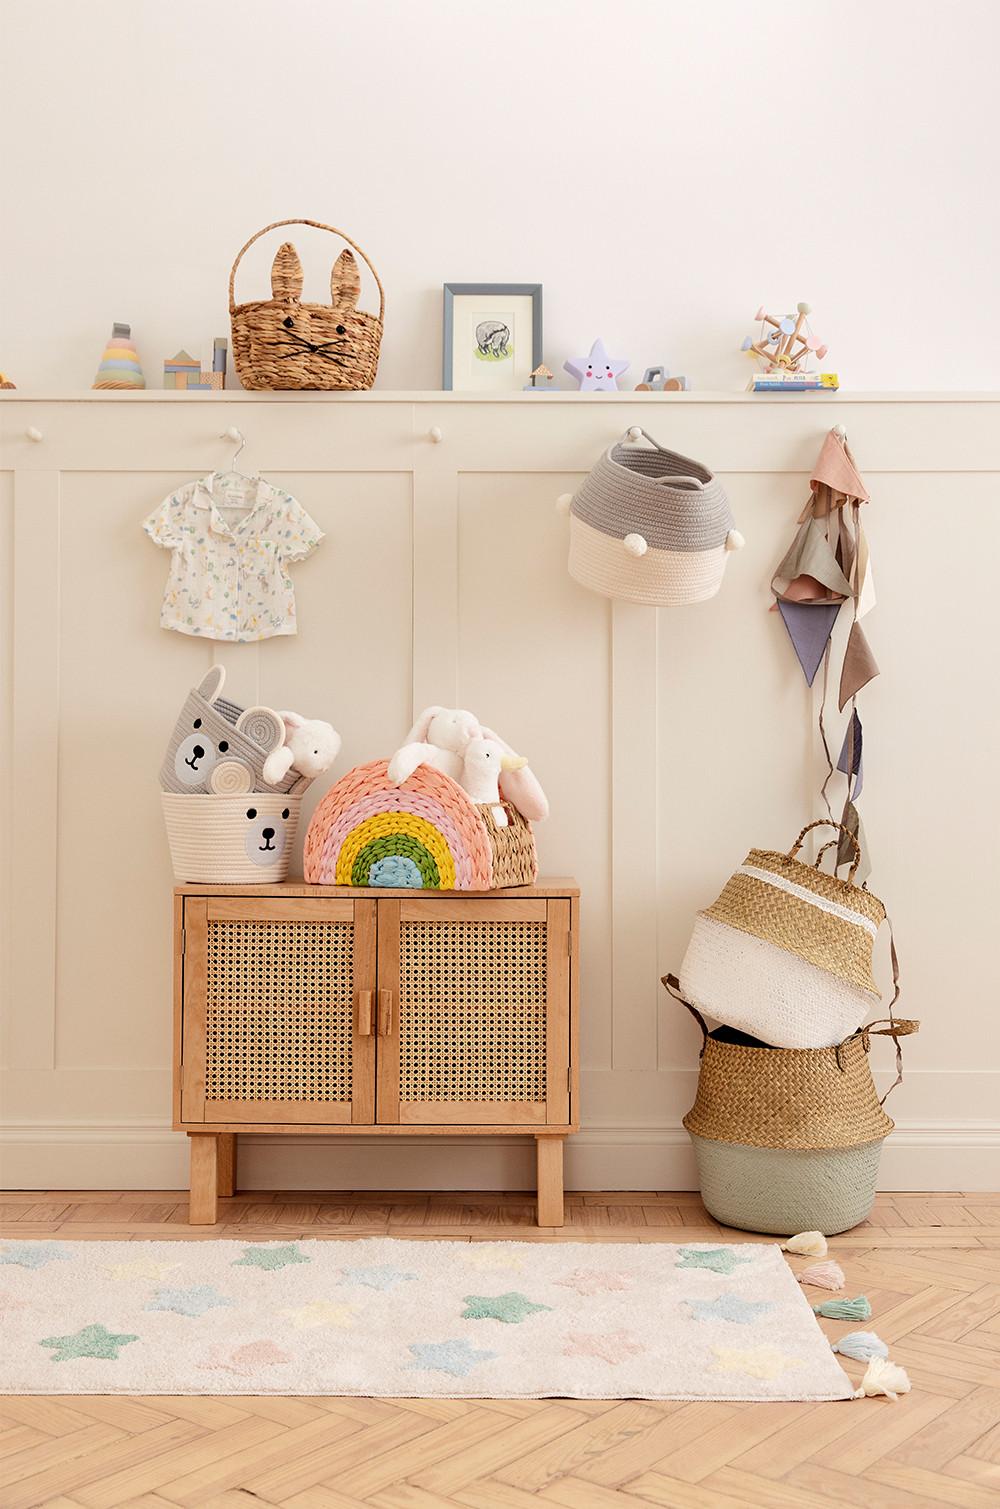 Nursery set up, showing shelfie which displays frames, storage baskets, plush toys and rugs